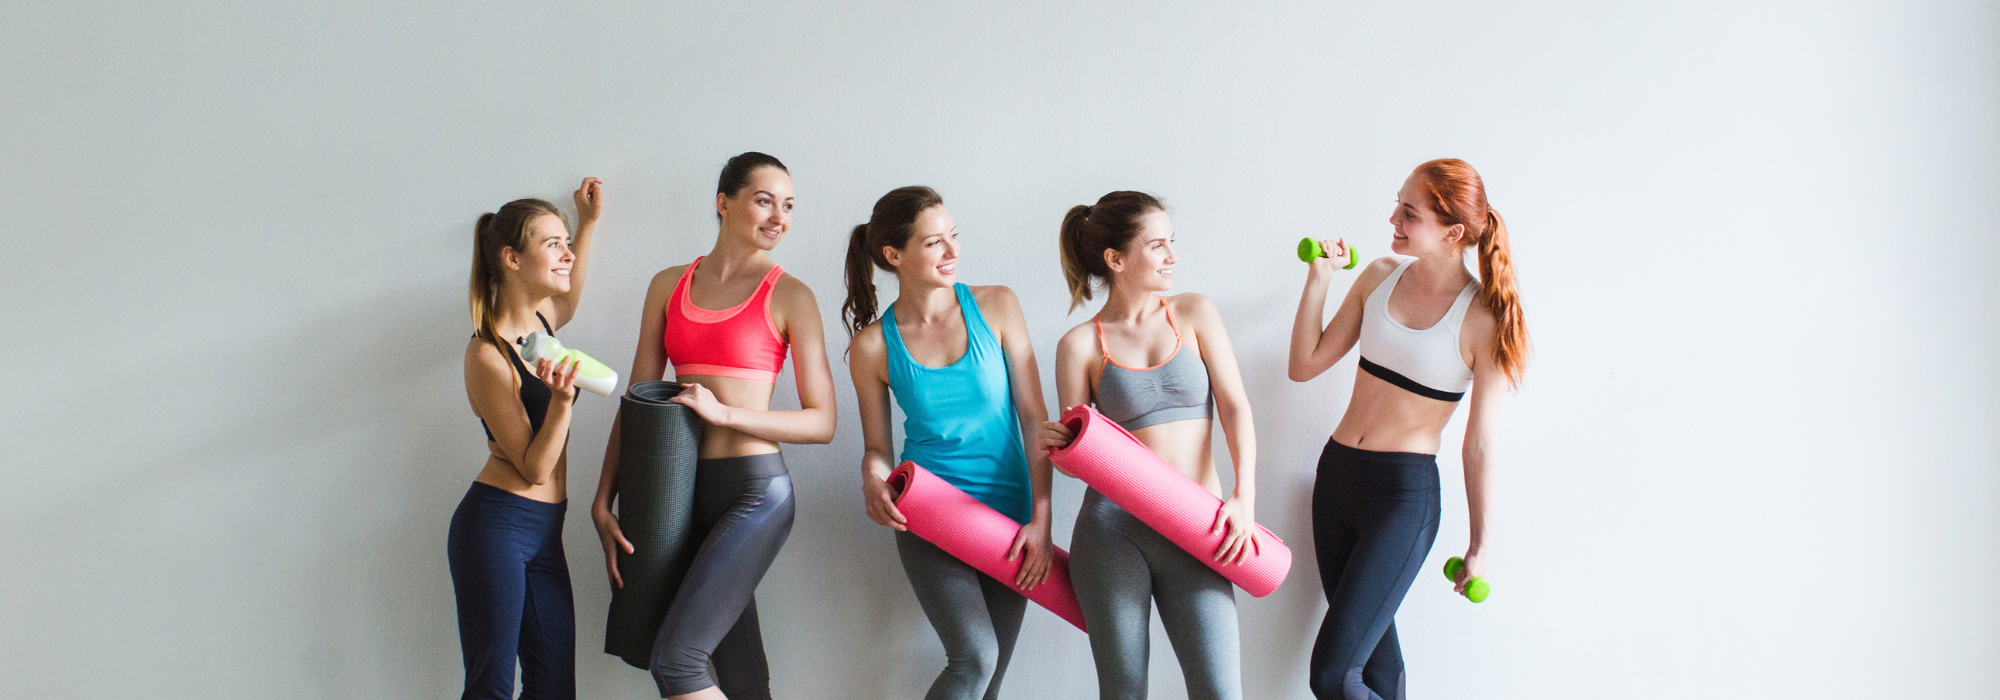 group of women wearing workout clothes with yoga mats